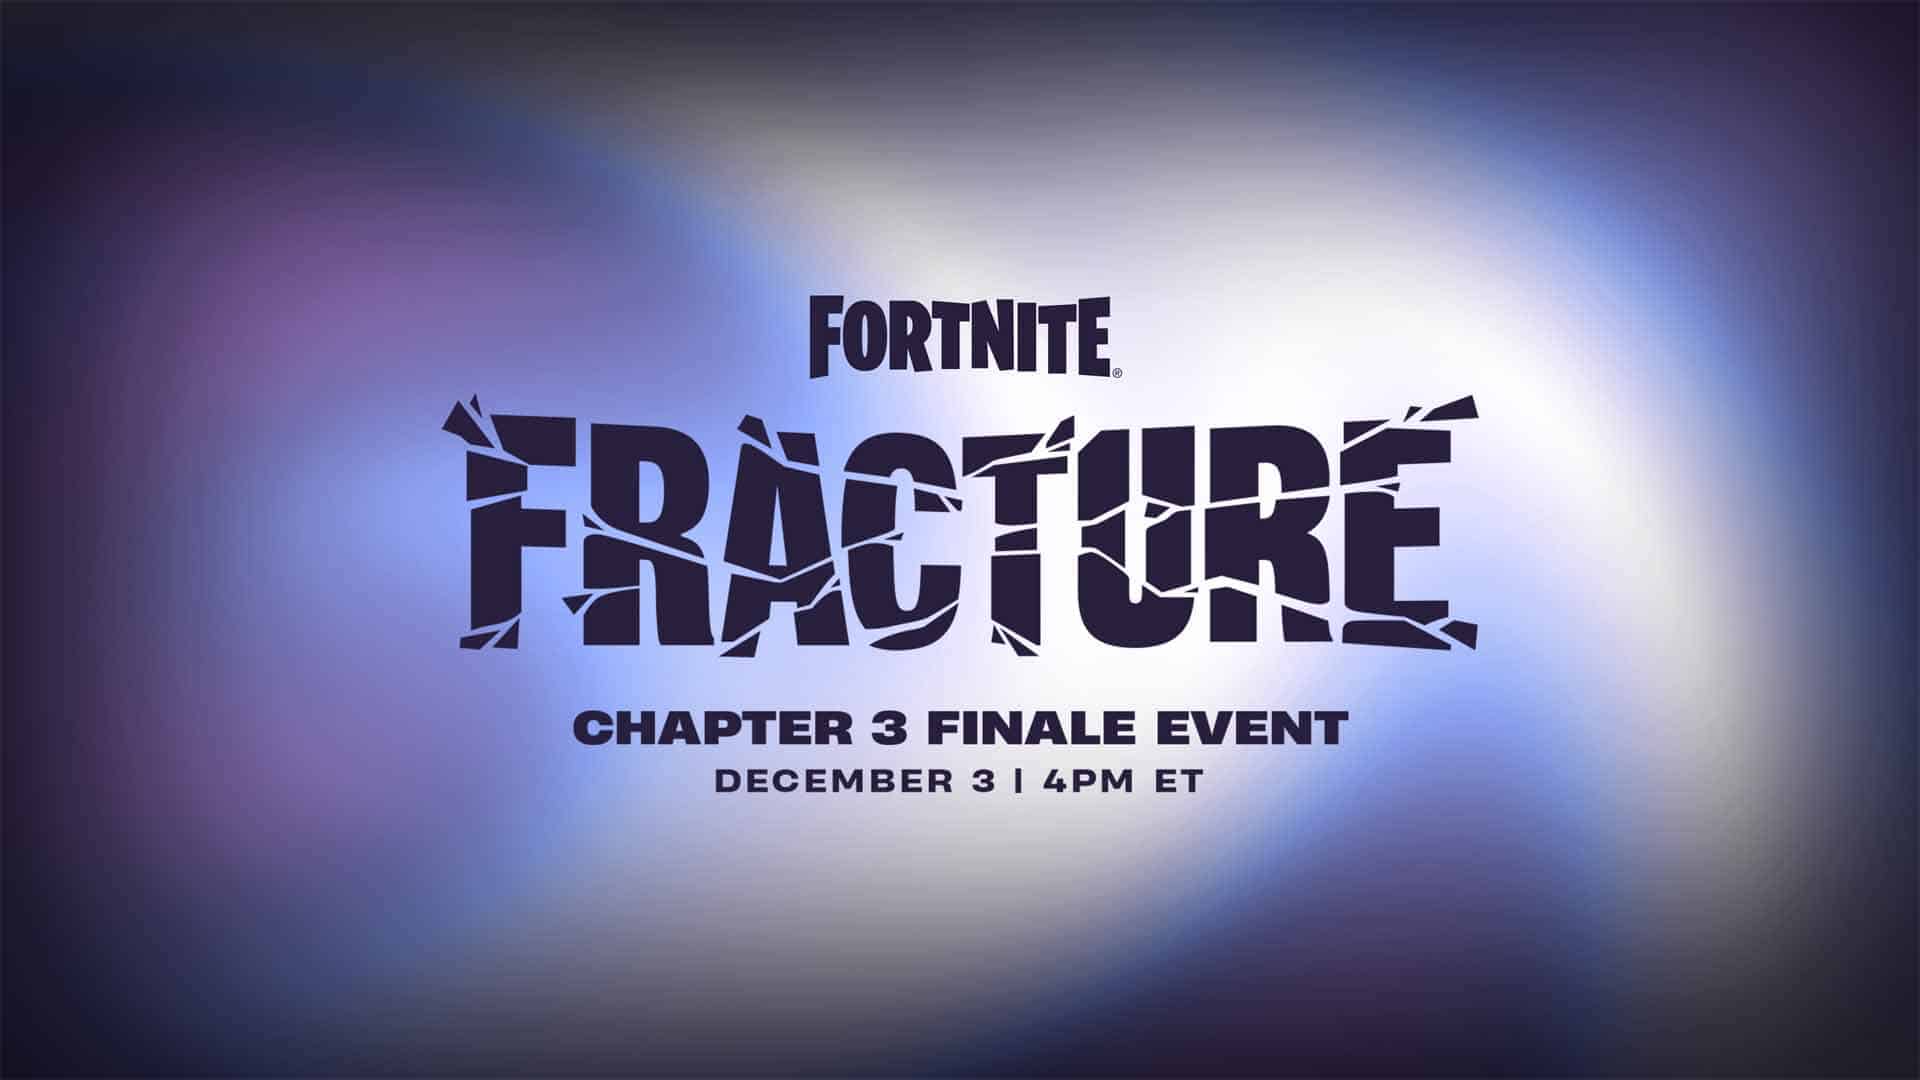 Fortnite Chapter 3 Finale Fracture Event date and what we know so far